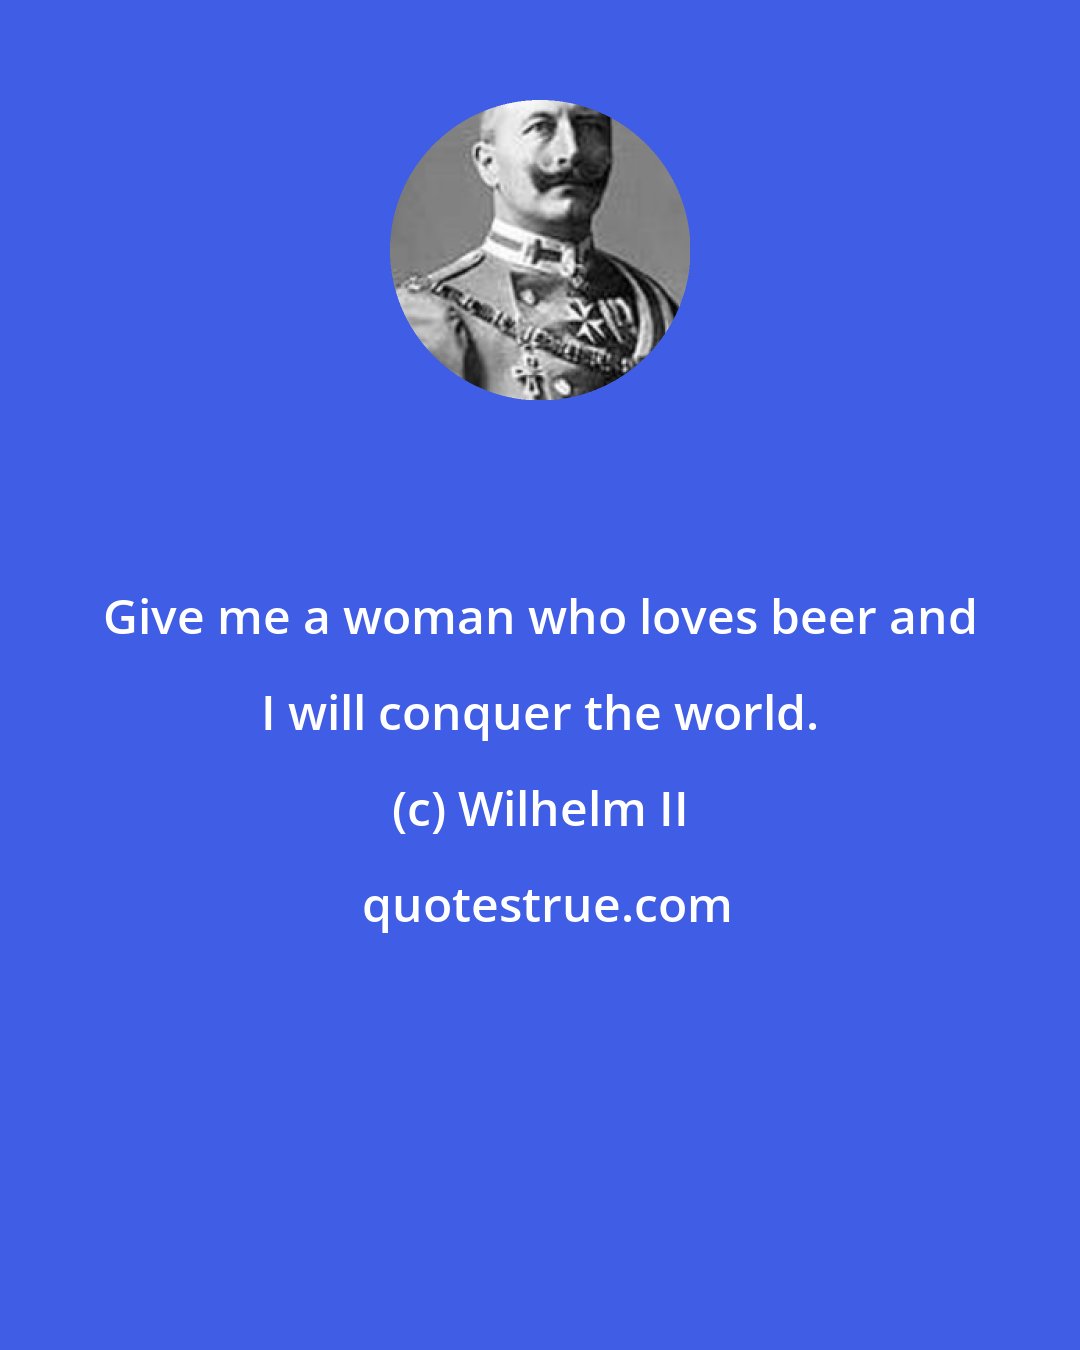 Wilhelm II: Give me a woman who loves beer and I will conquer the world.